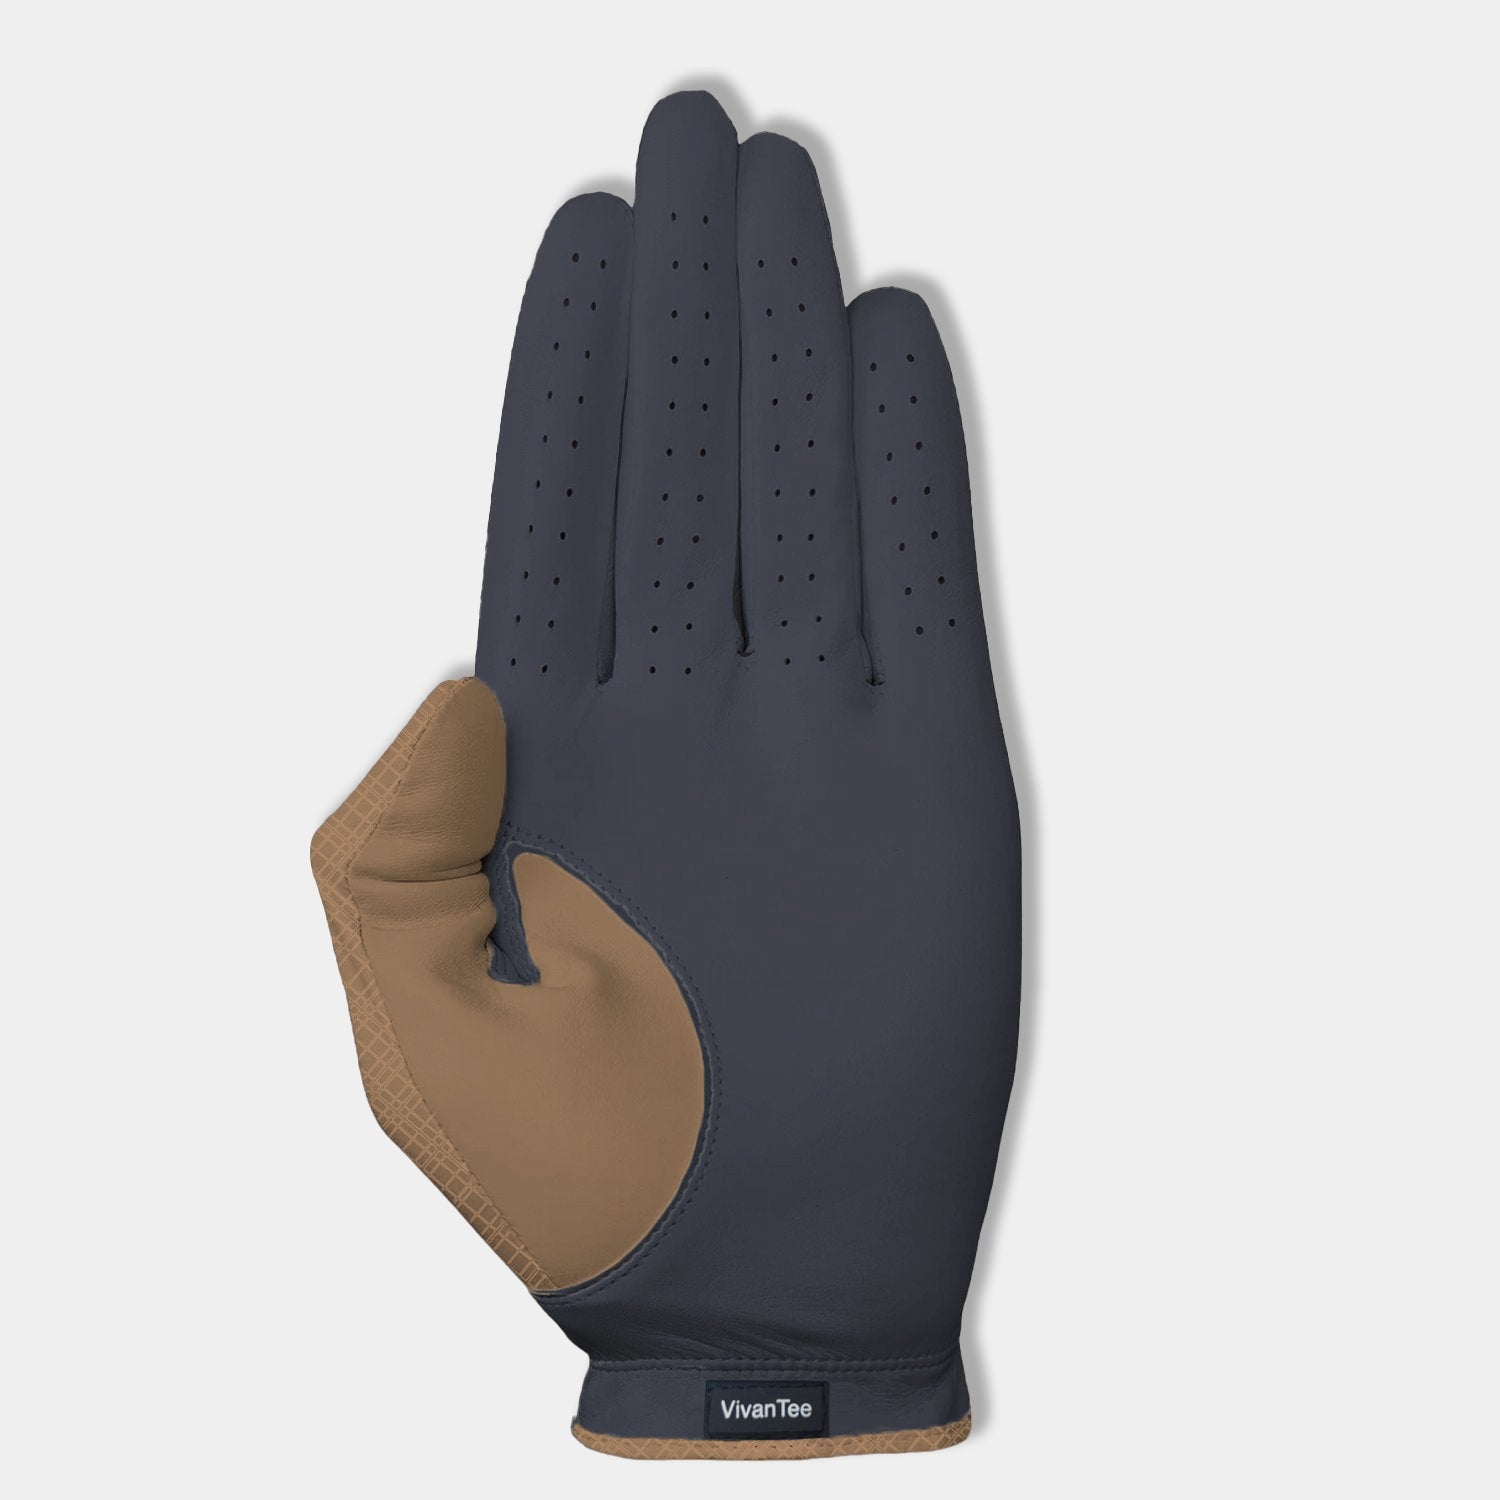 Bottom of golf glove in navy blue and brown.